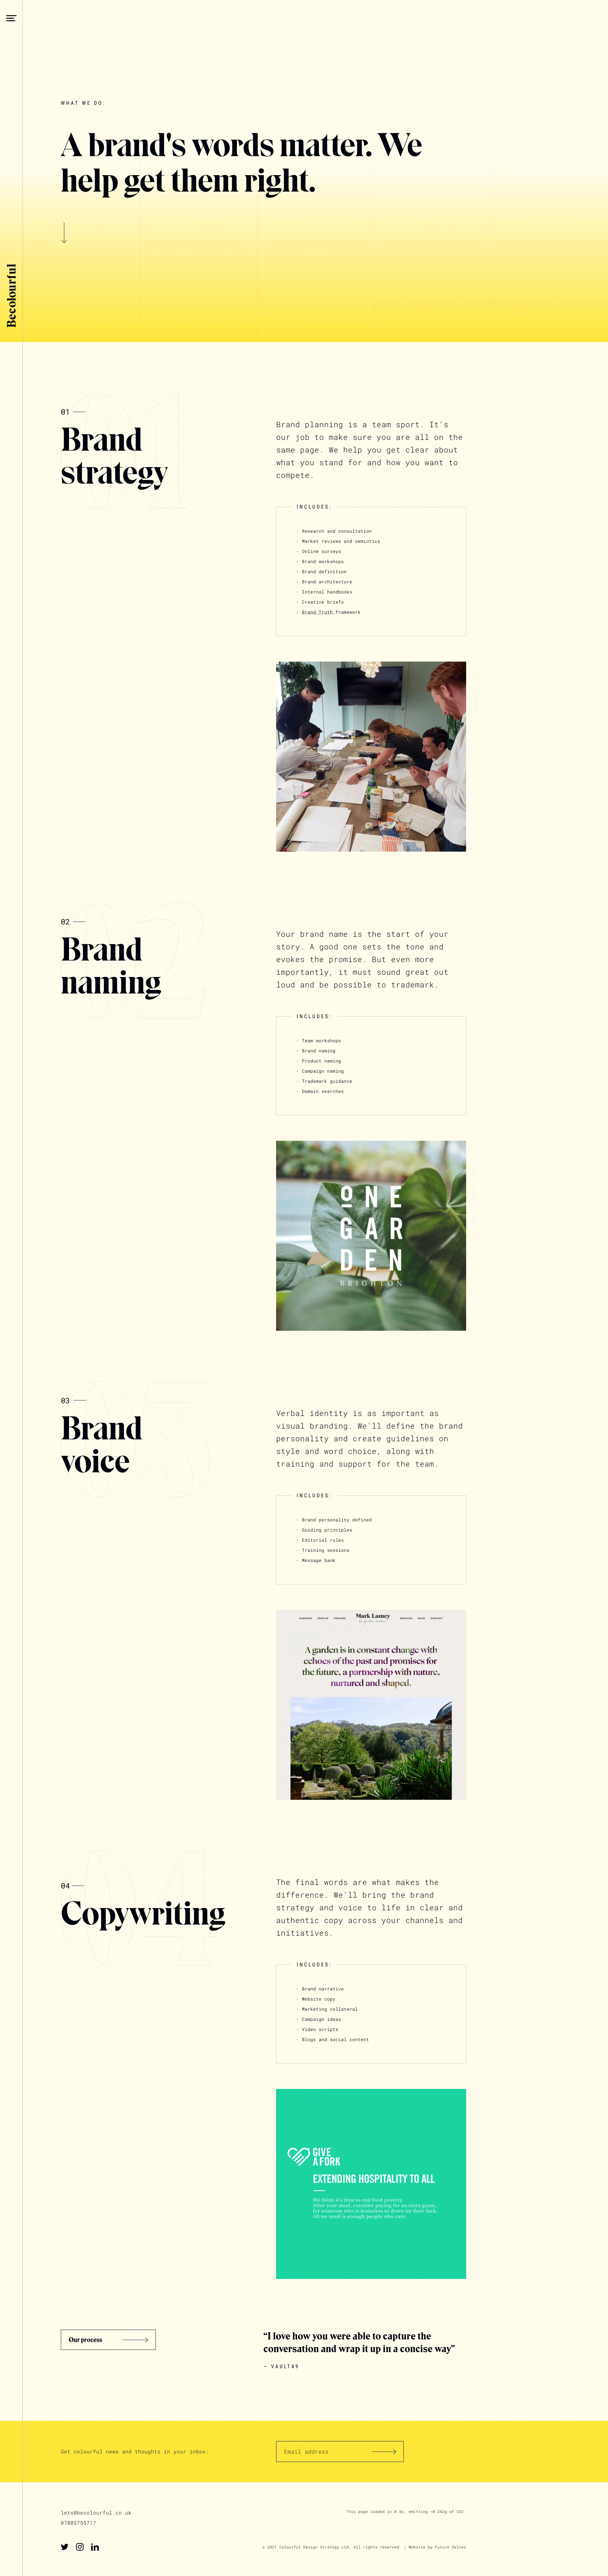 Becolourful Landing Page Example: We're here to find your focus, tune your voice, and get you heard.